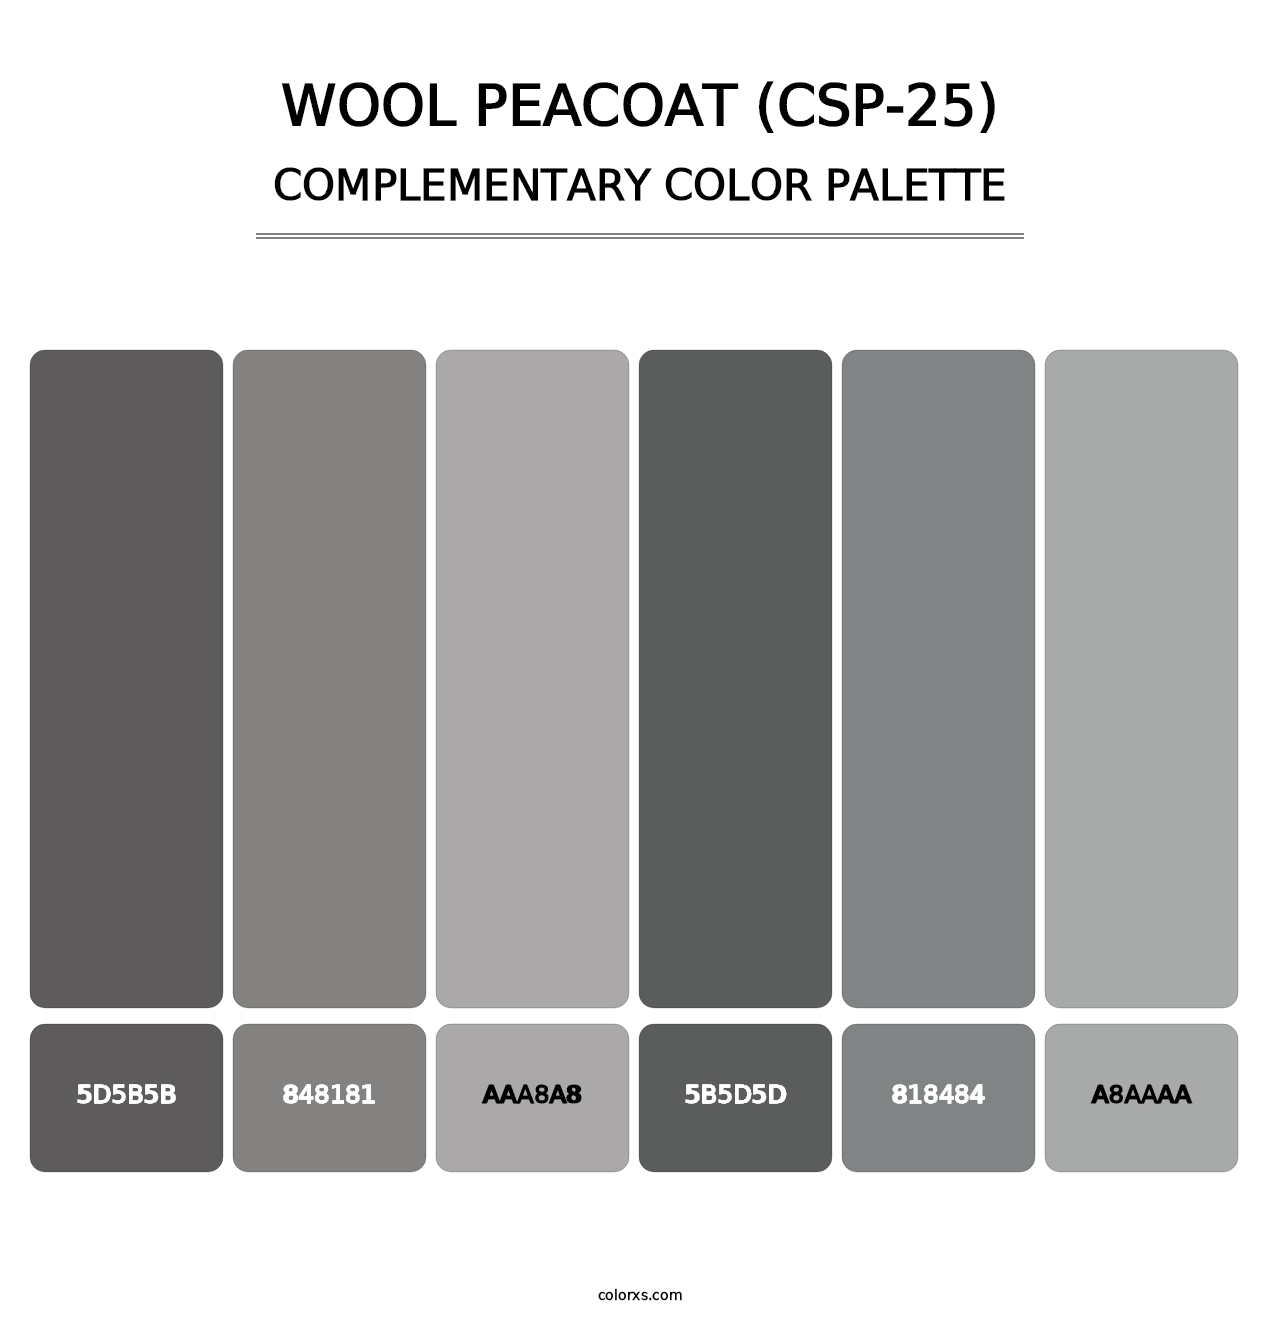 Wool Peacoat (CSP-25) - Complementary Color Palette